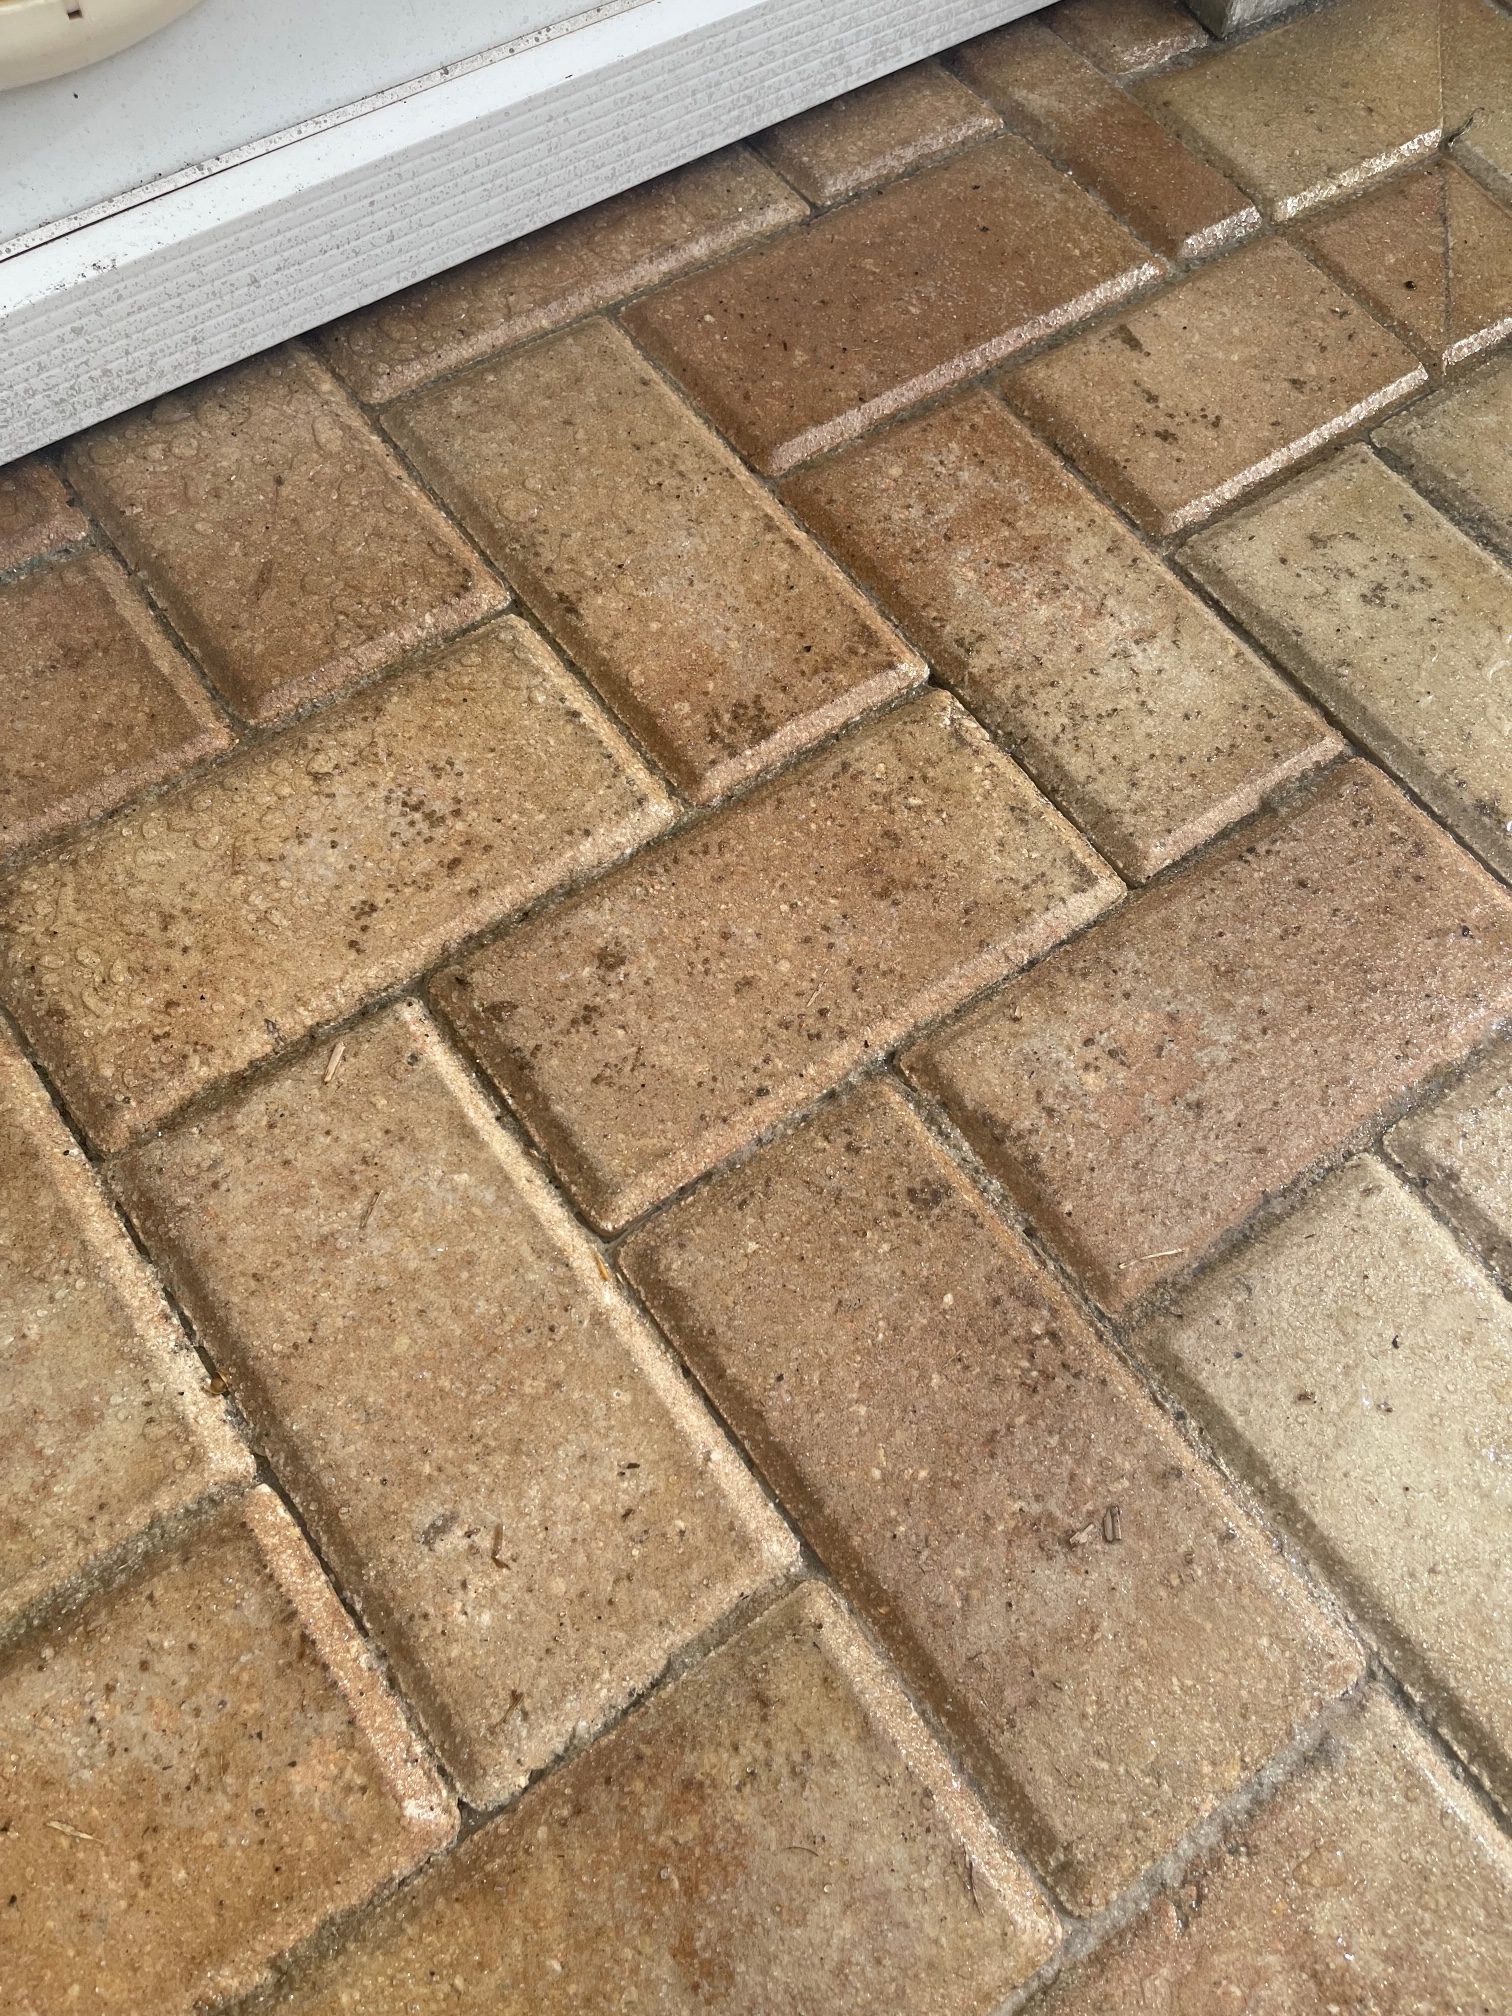 How to Clean Belgard Pavers? Paver Maintenance Guide - Eagle Pavers